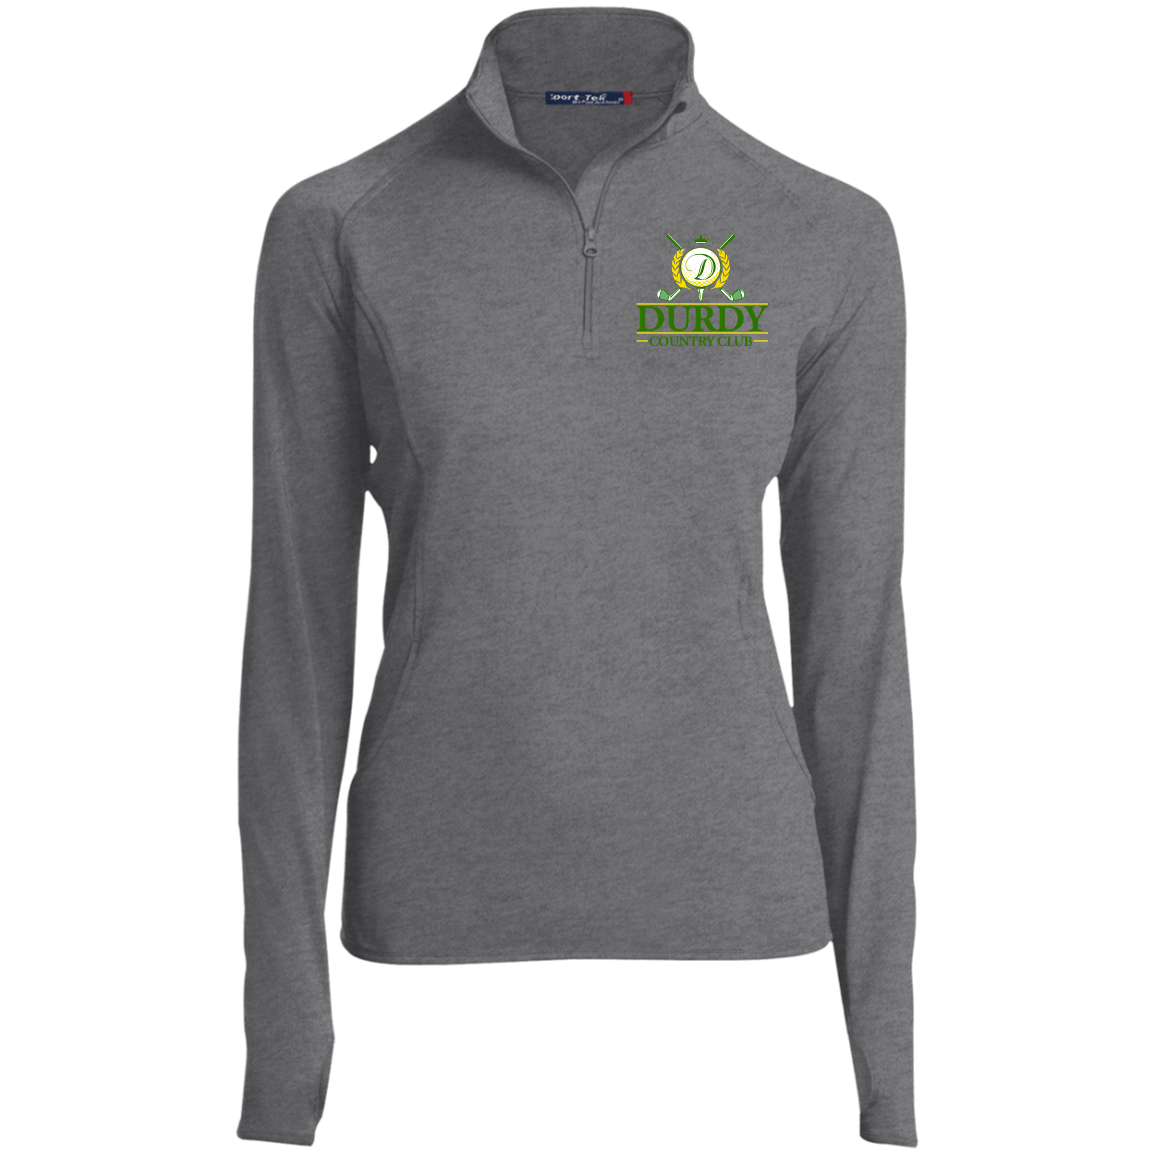 Durdy Country Club Women's 1/2 Zip Performance Pullover